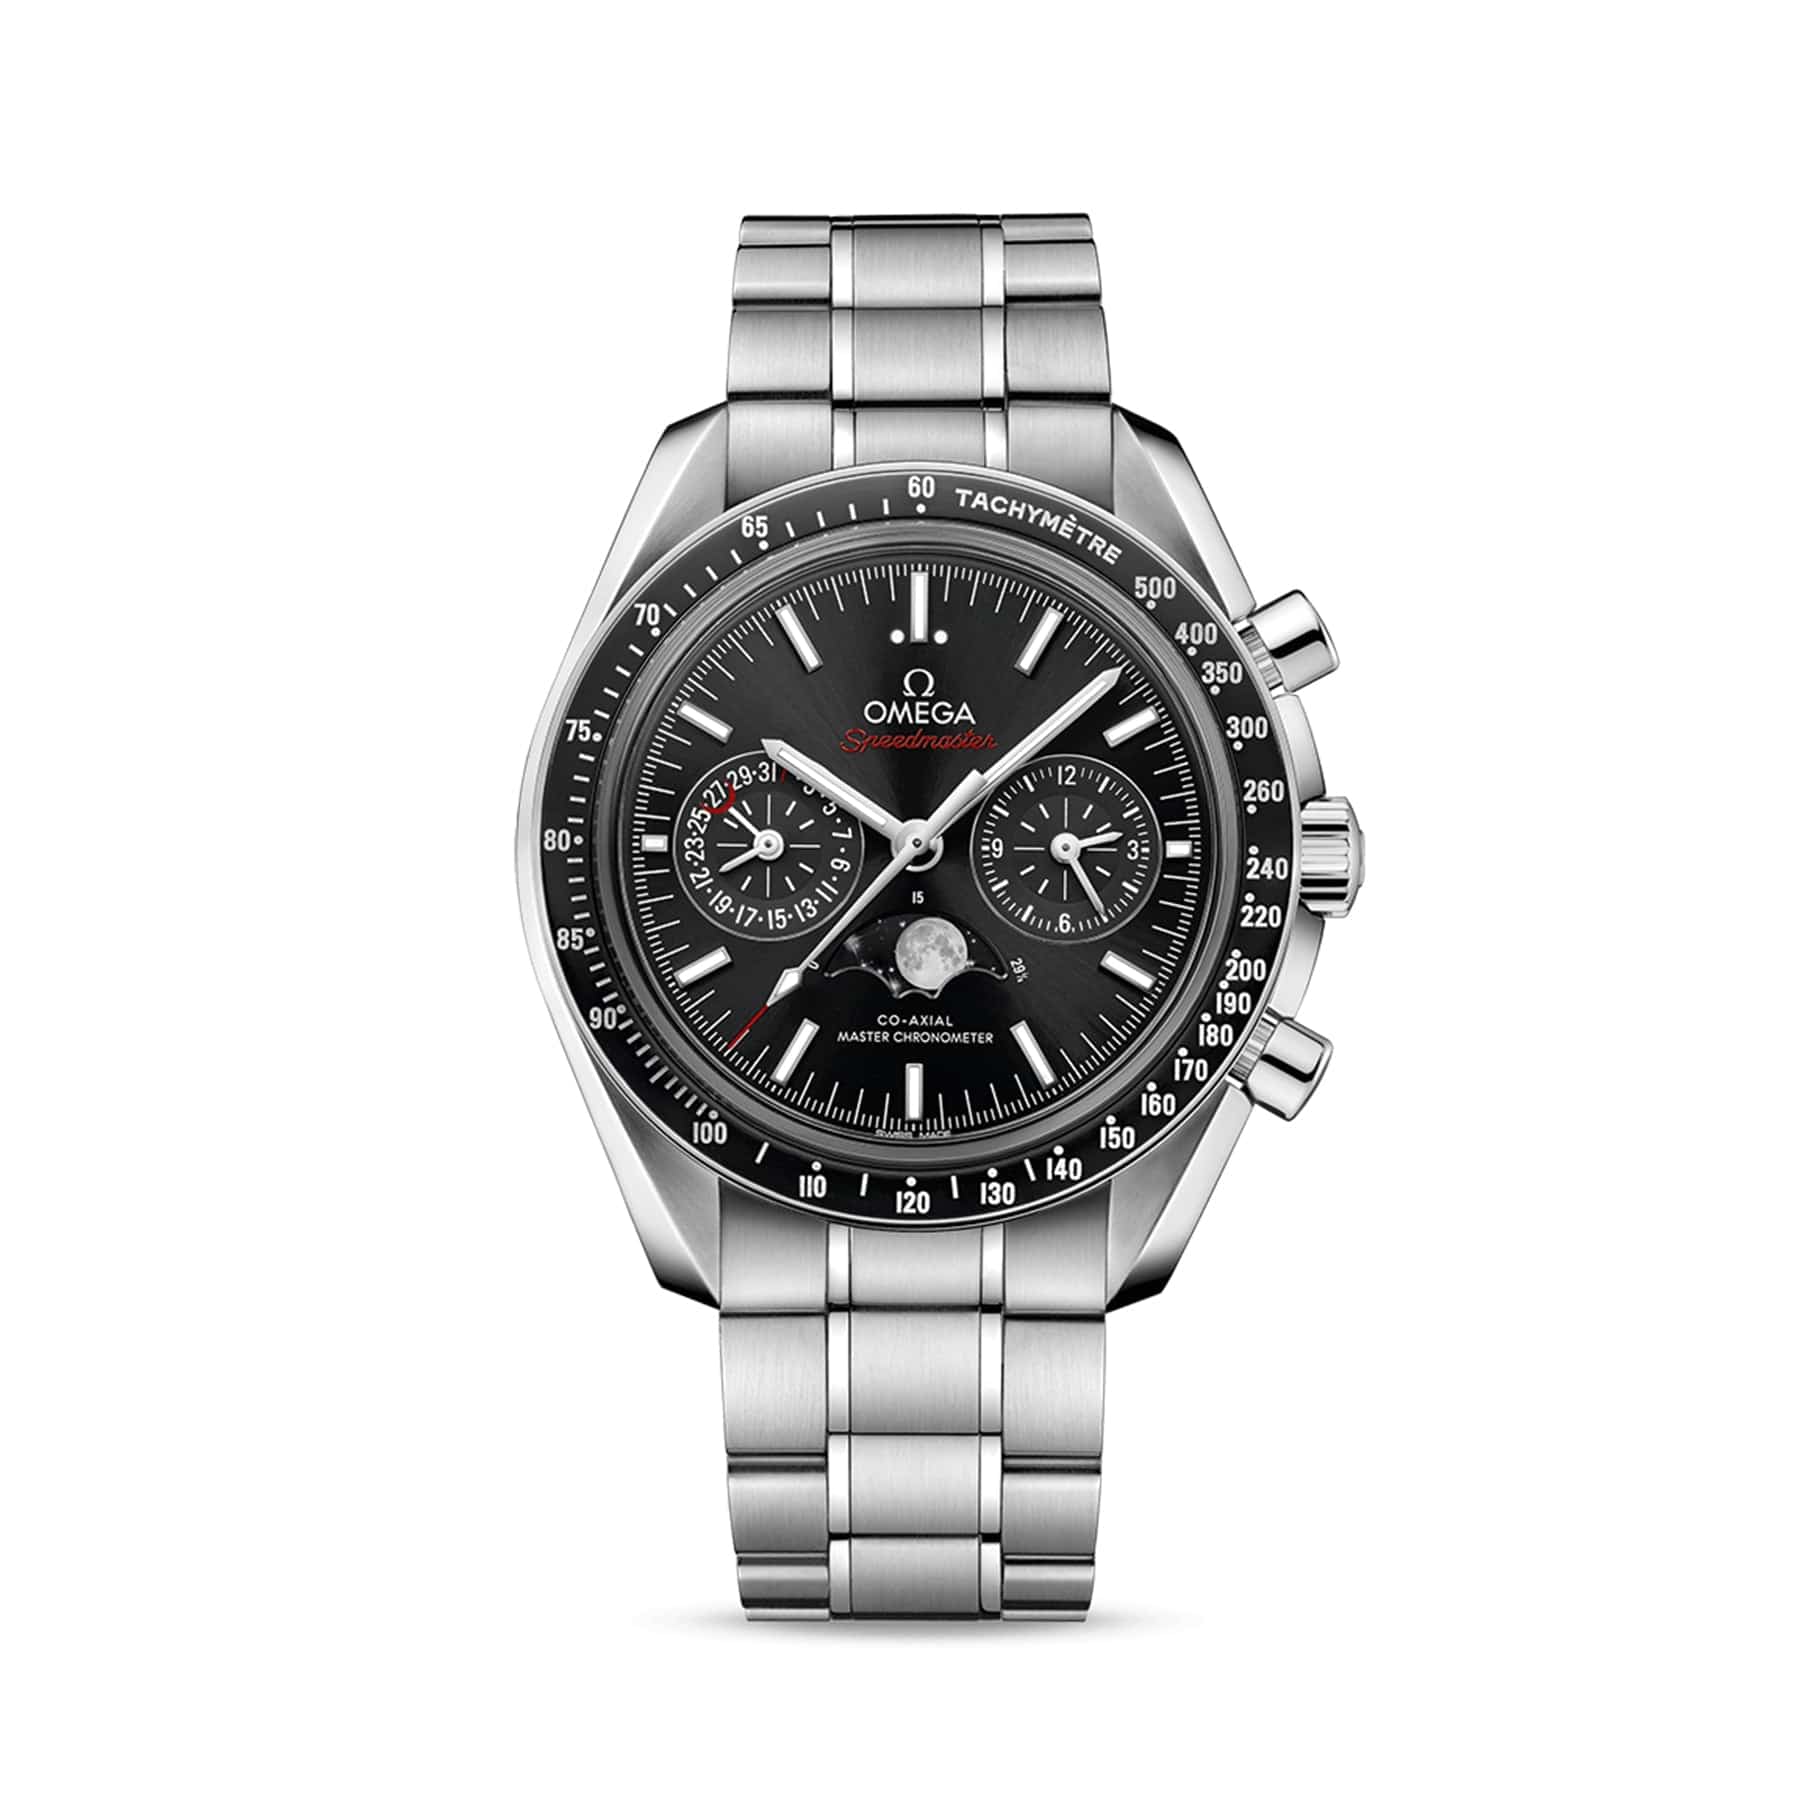 OMEGA Speedmaster Moonphase Co-Axial Master Chronometer Moonphase Chronograph 44.25mm 304.30.44.30.01.001